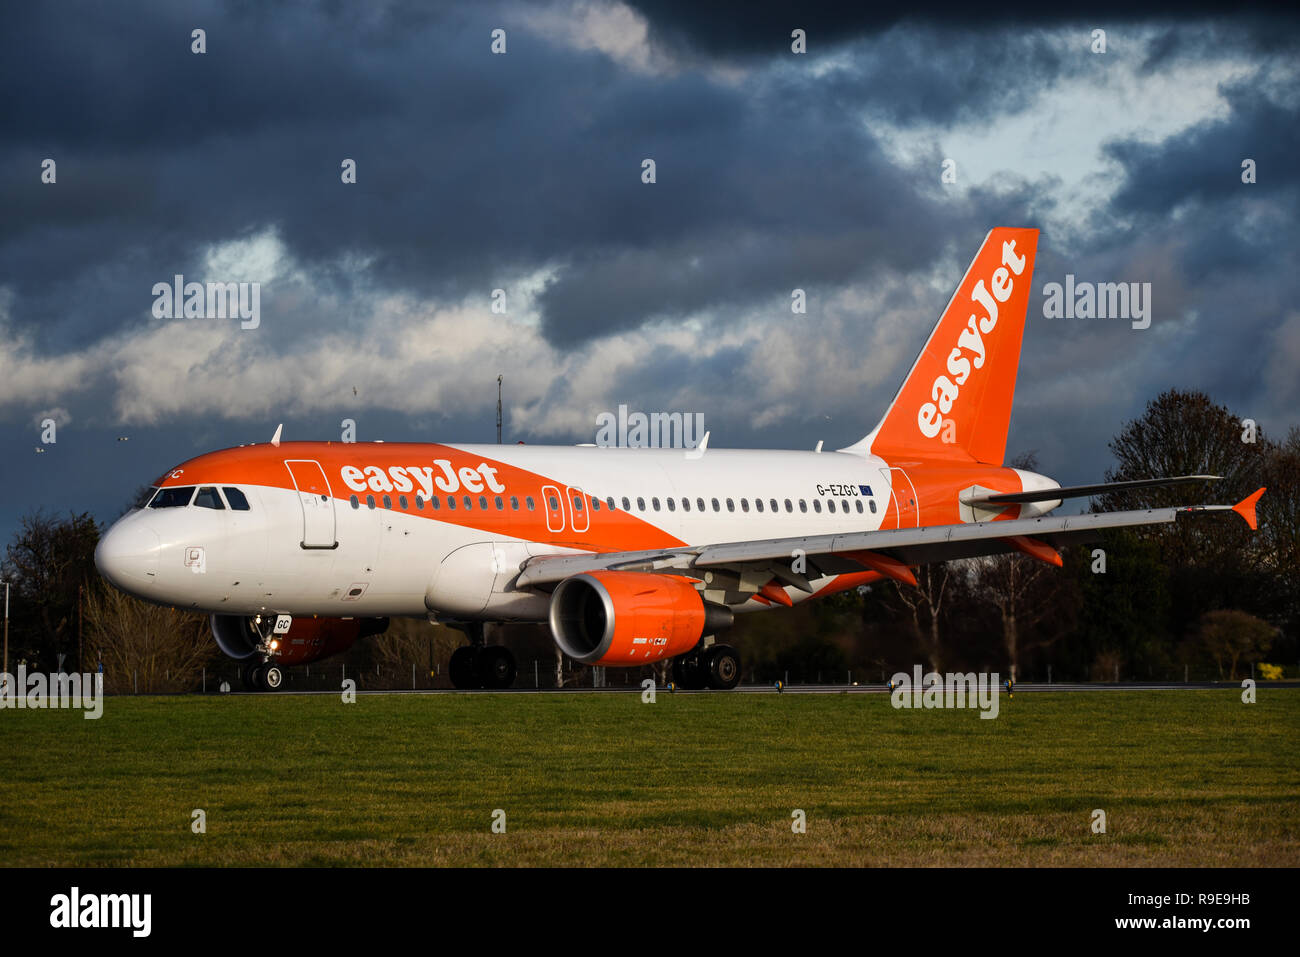 easyjet Airbus A319 jet airliner plane at London Southend Airport, Essex, UK under heavy sky. Bad weather. Black clouds Stock Photo